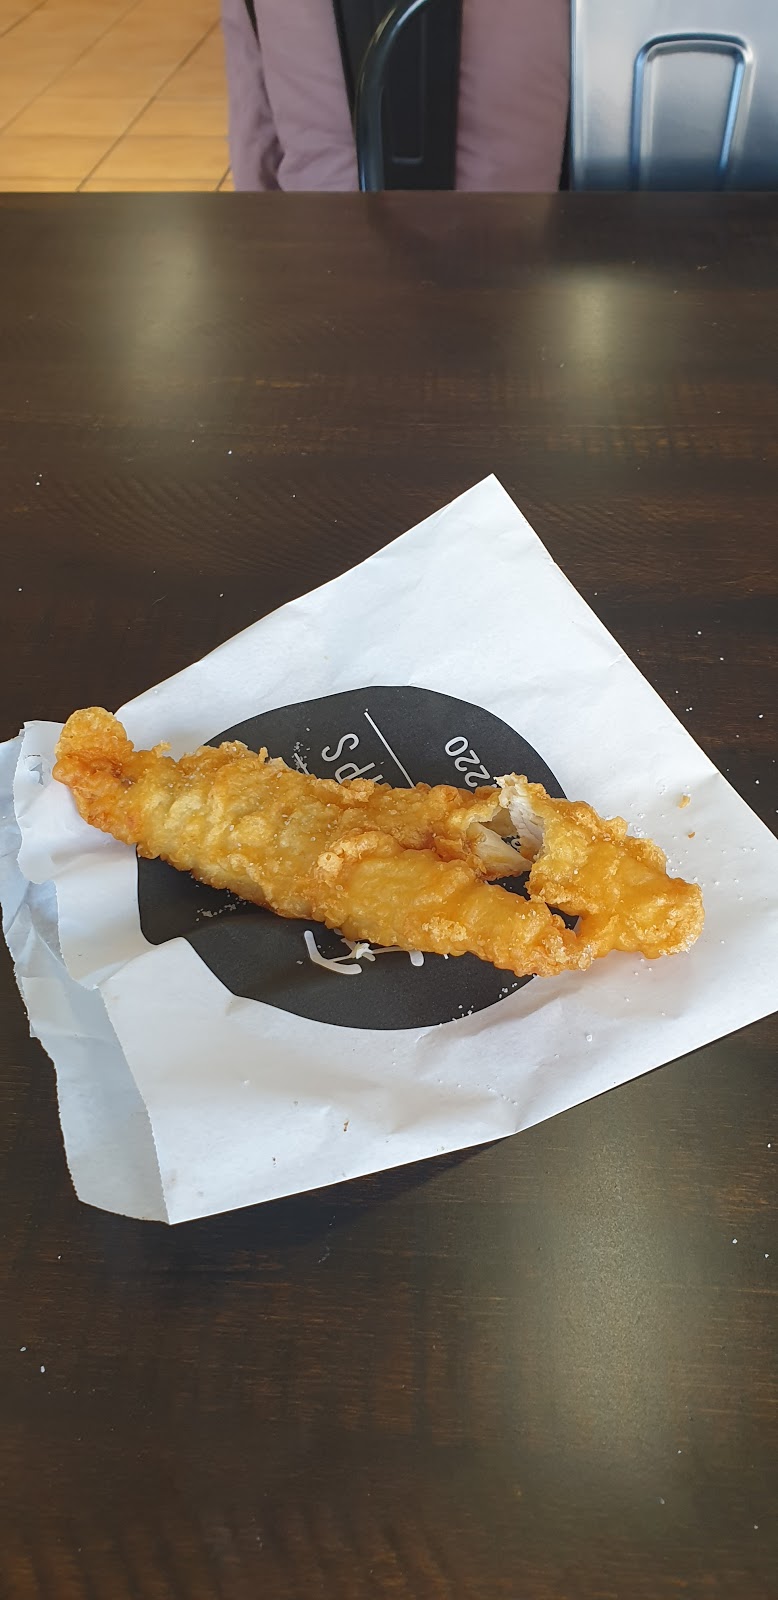 Fraggles fish and chips | restaurant | 297 Invermay Rd, Invermay TAS 7248, Australia | 0363331220 OR +61 3 6333 1220